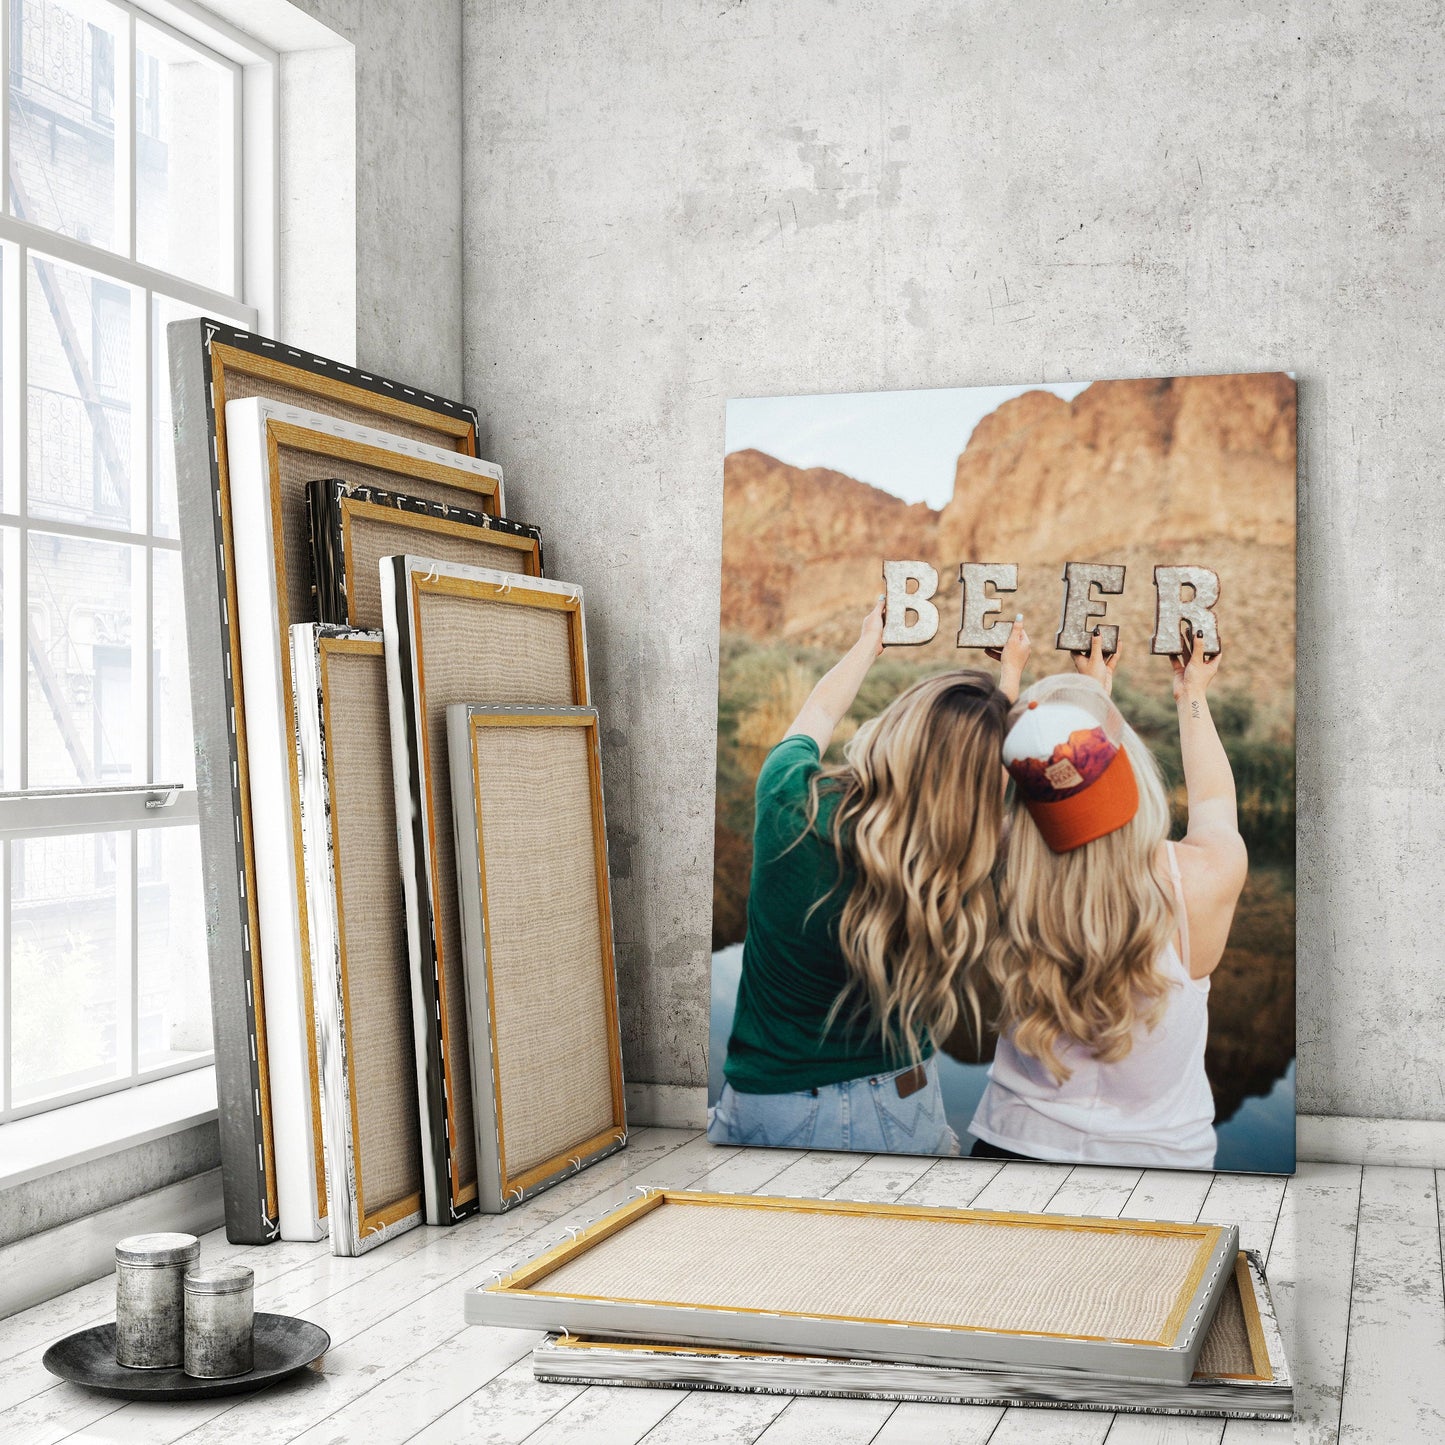 Best Friends Photo on canvas